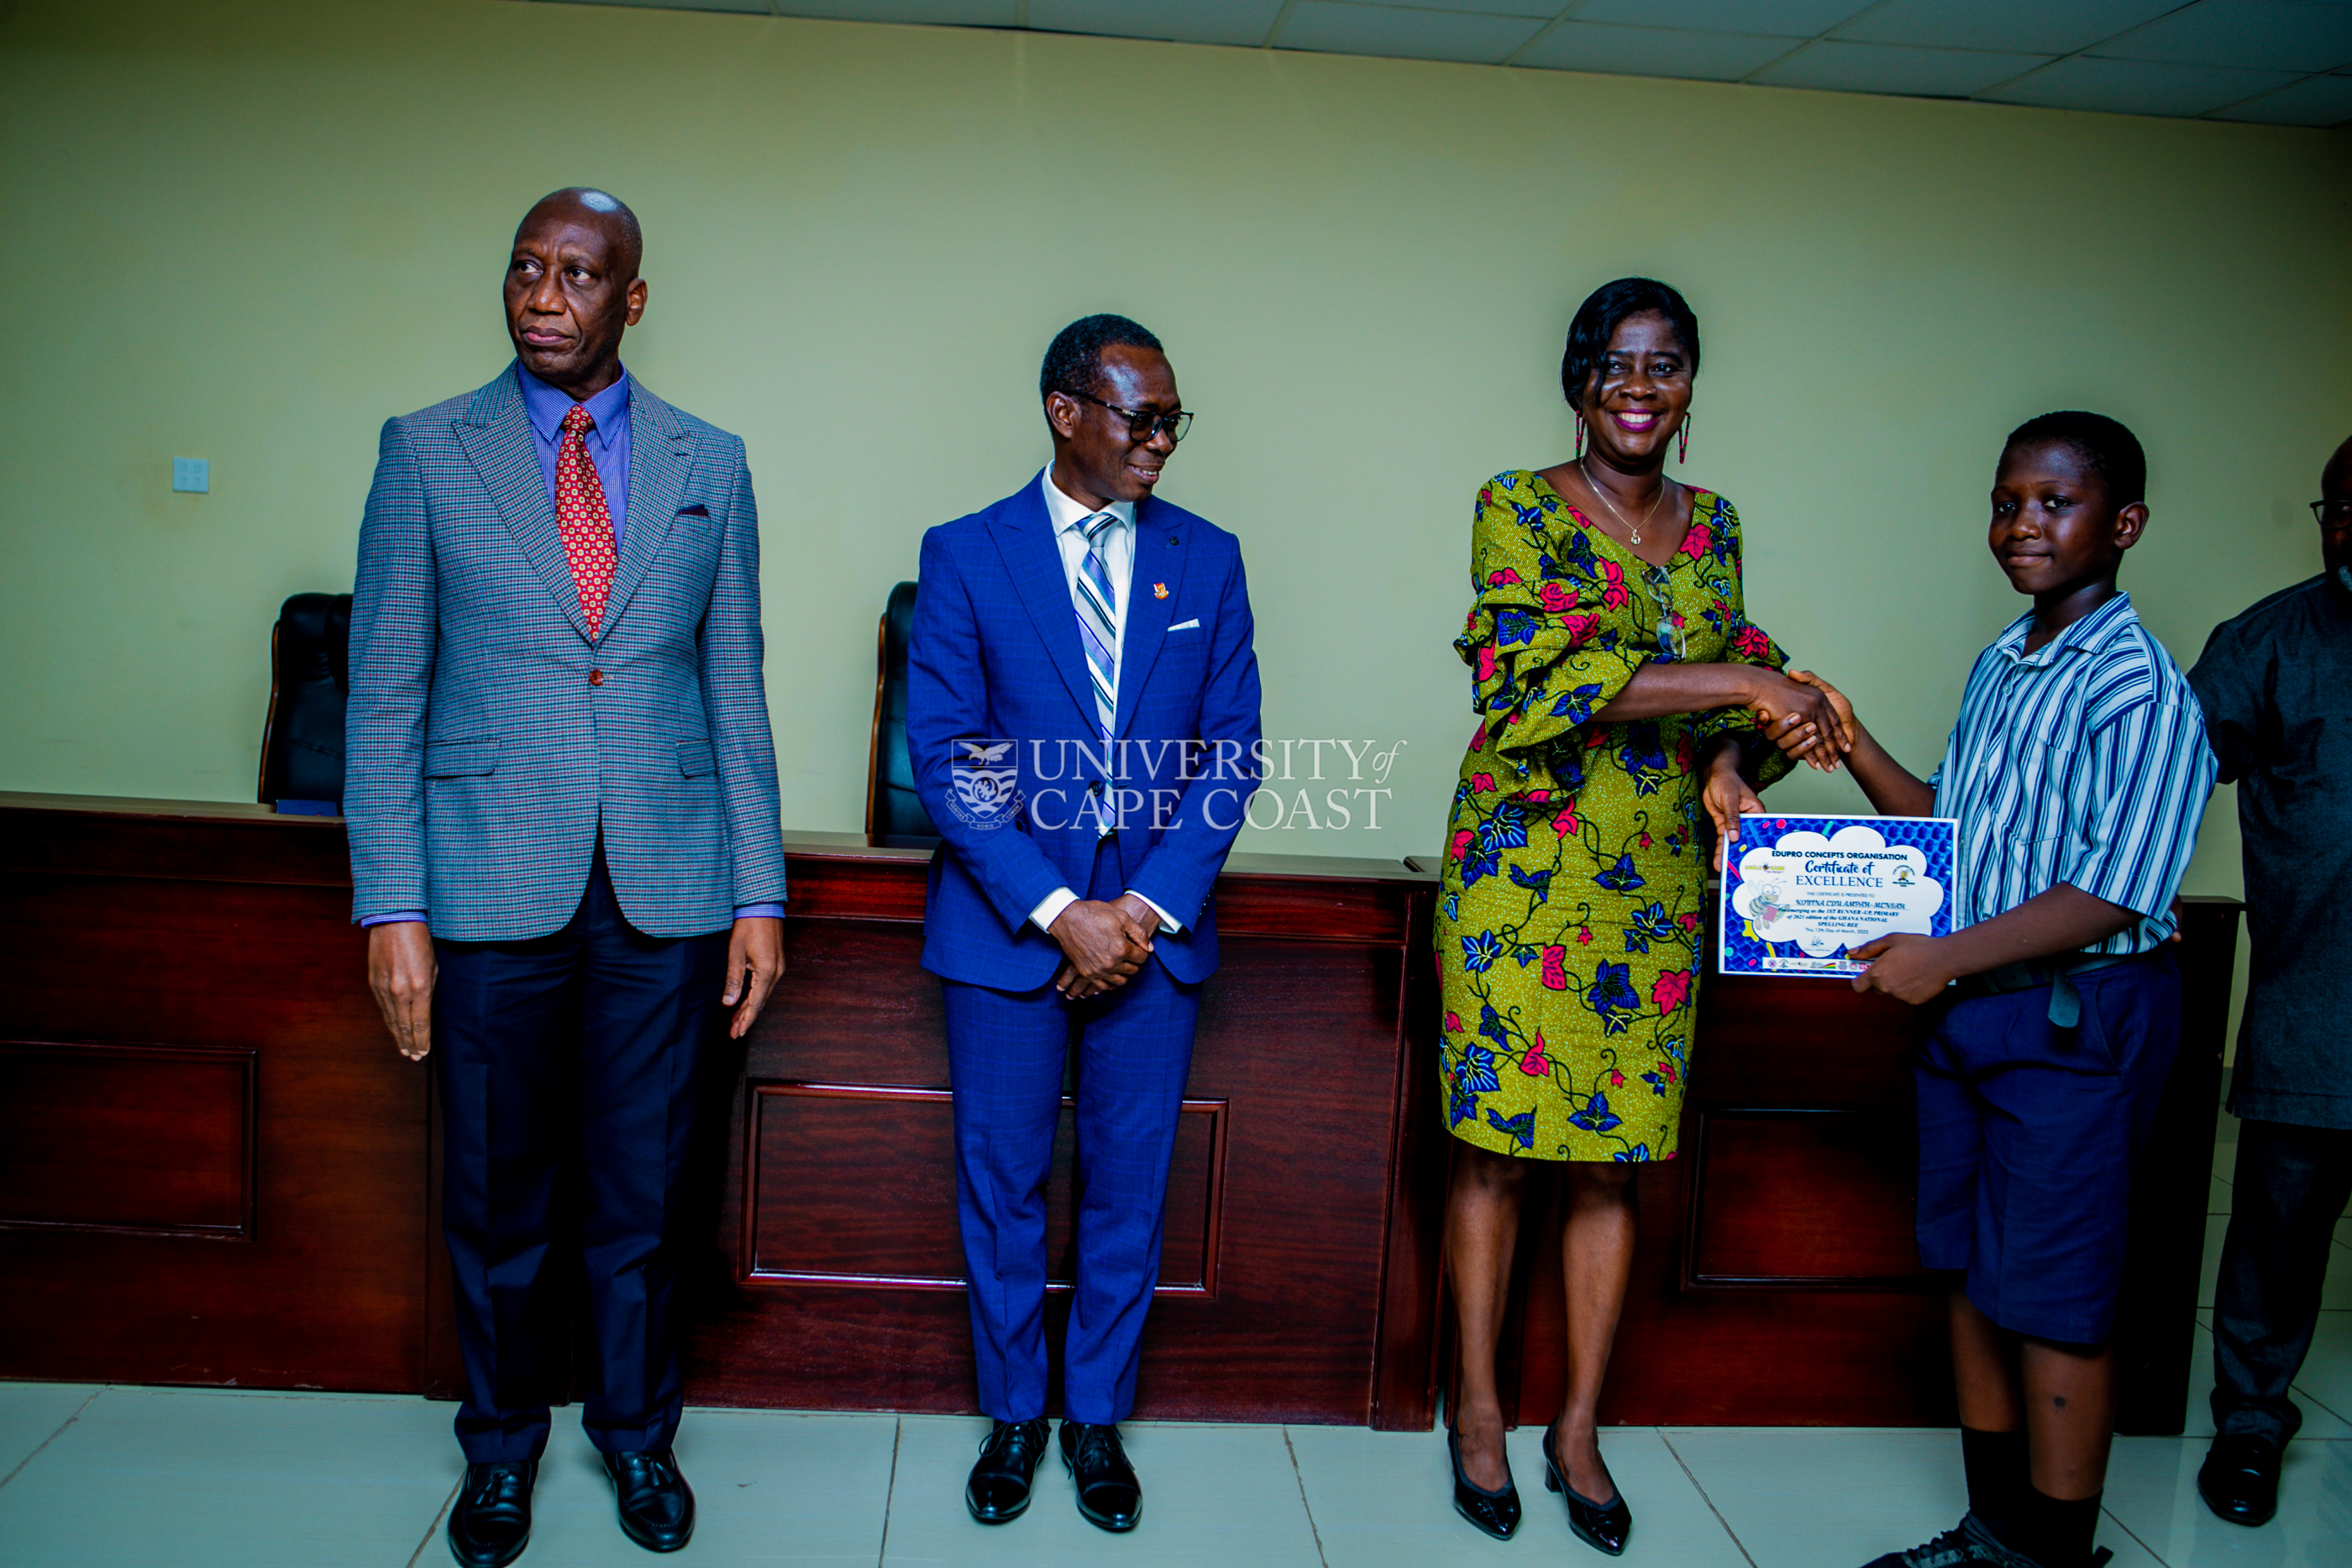 An award winner in a handshake with Pro VC-UCC, Prof. Rosemond Boohene. Looking on are the Vice-Chancellor (middle) and Registrar, Mr.Jeff Onyame (left)